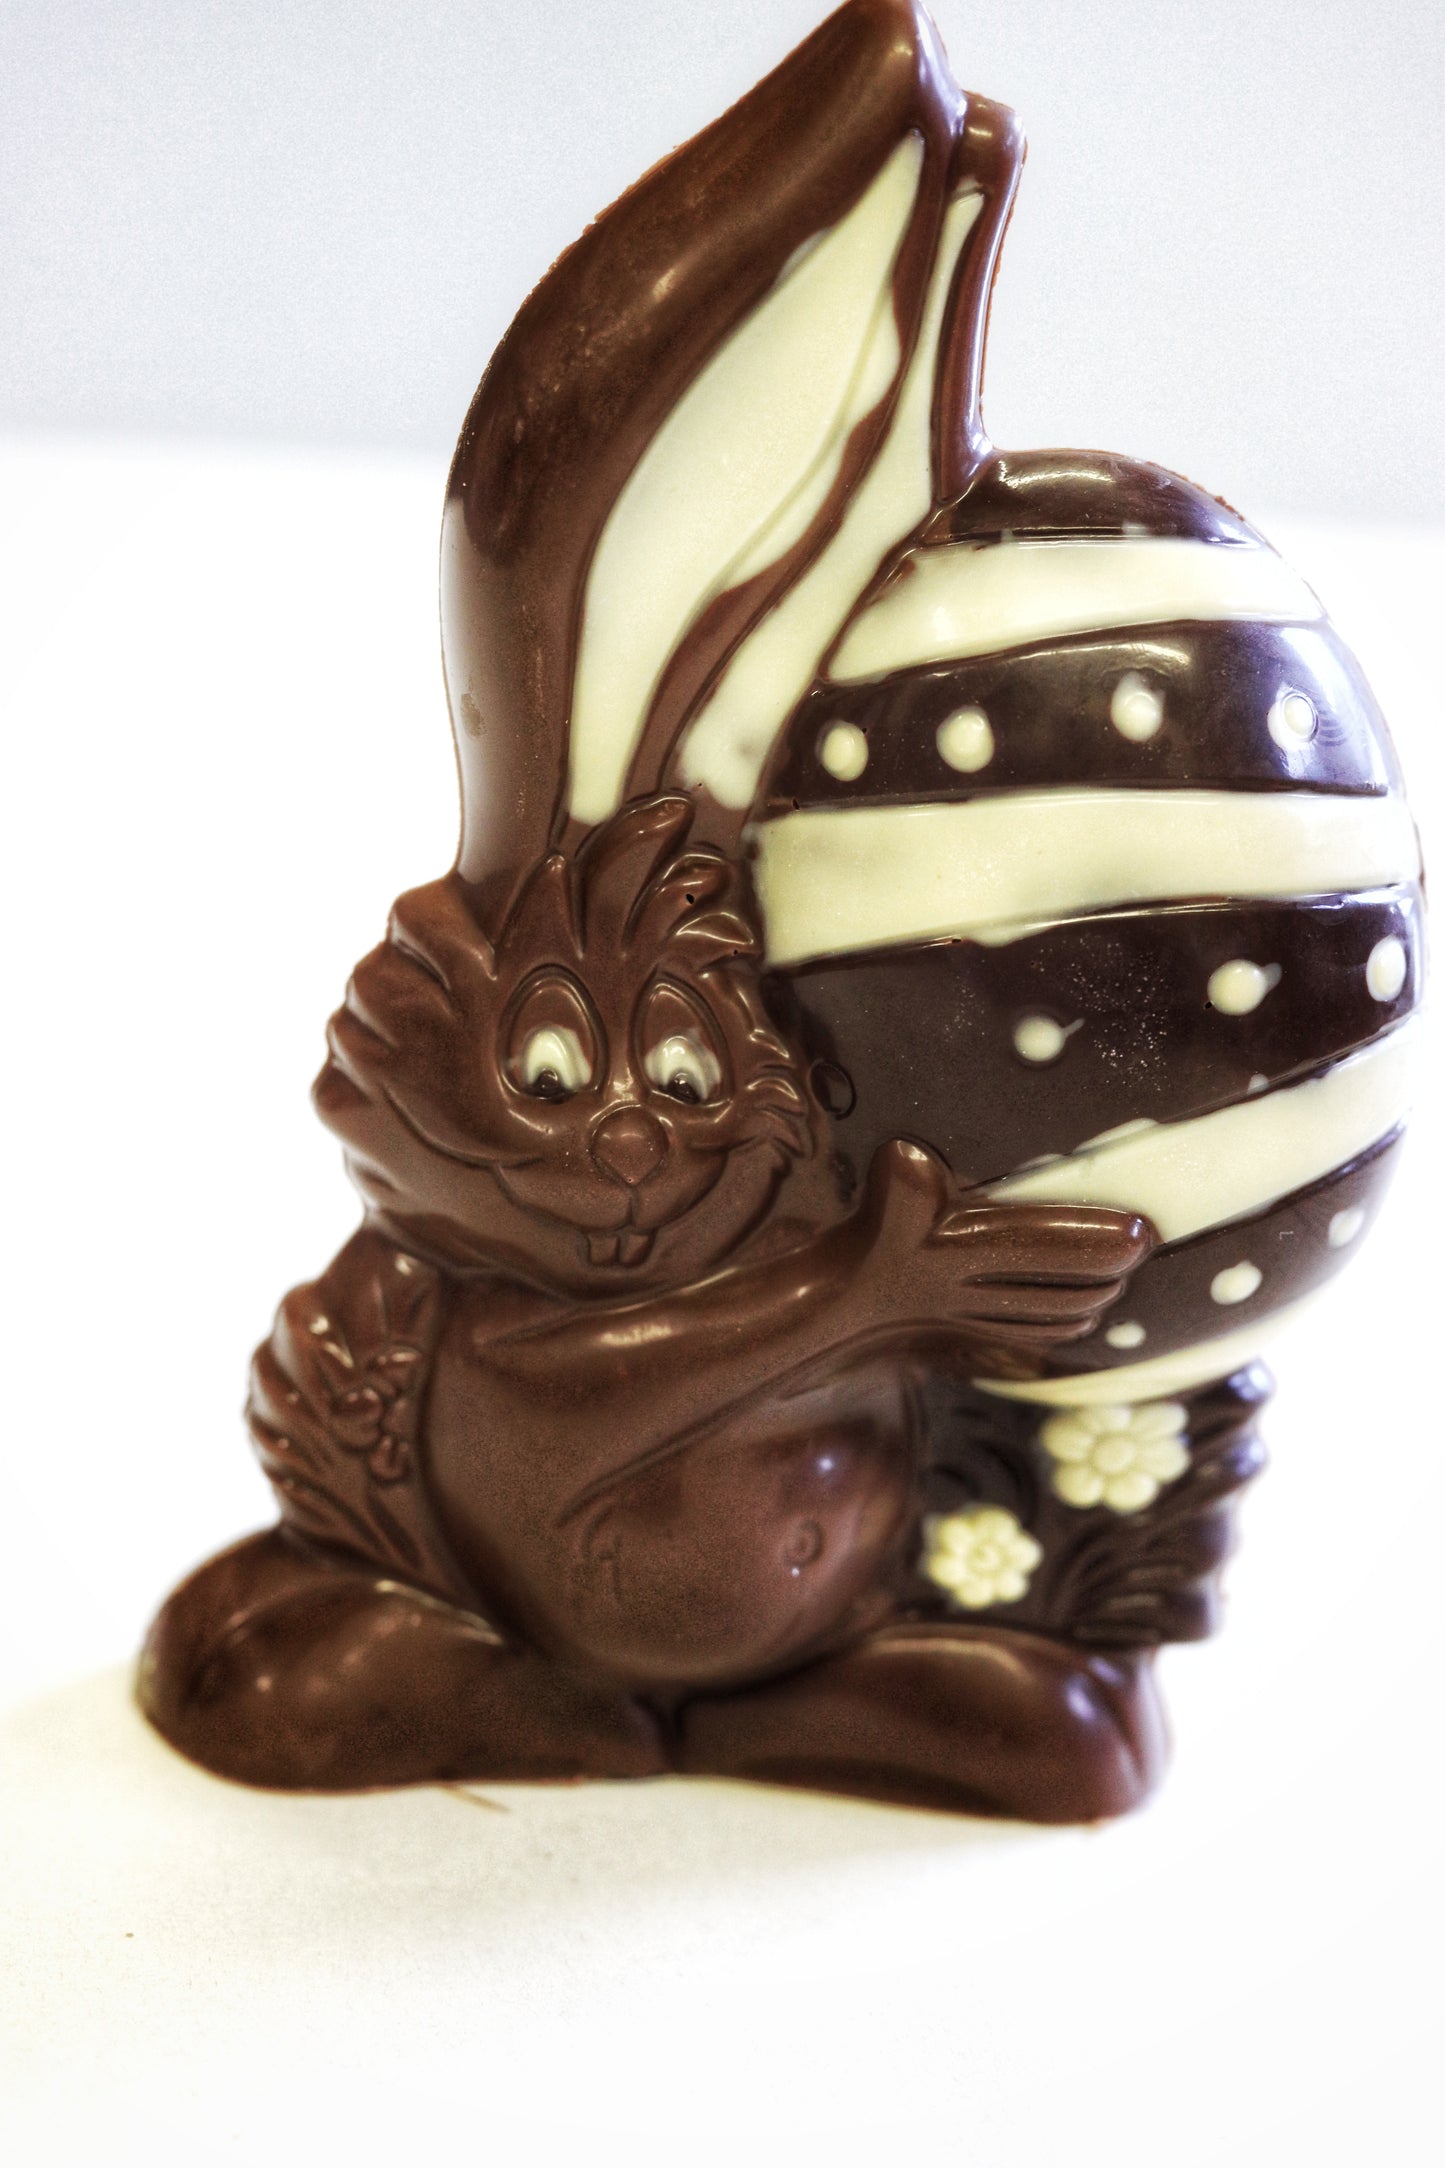 handmade chocolate easter bunny holding egg with flowers by Nelson's Chocofellar